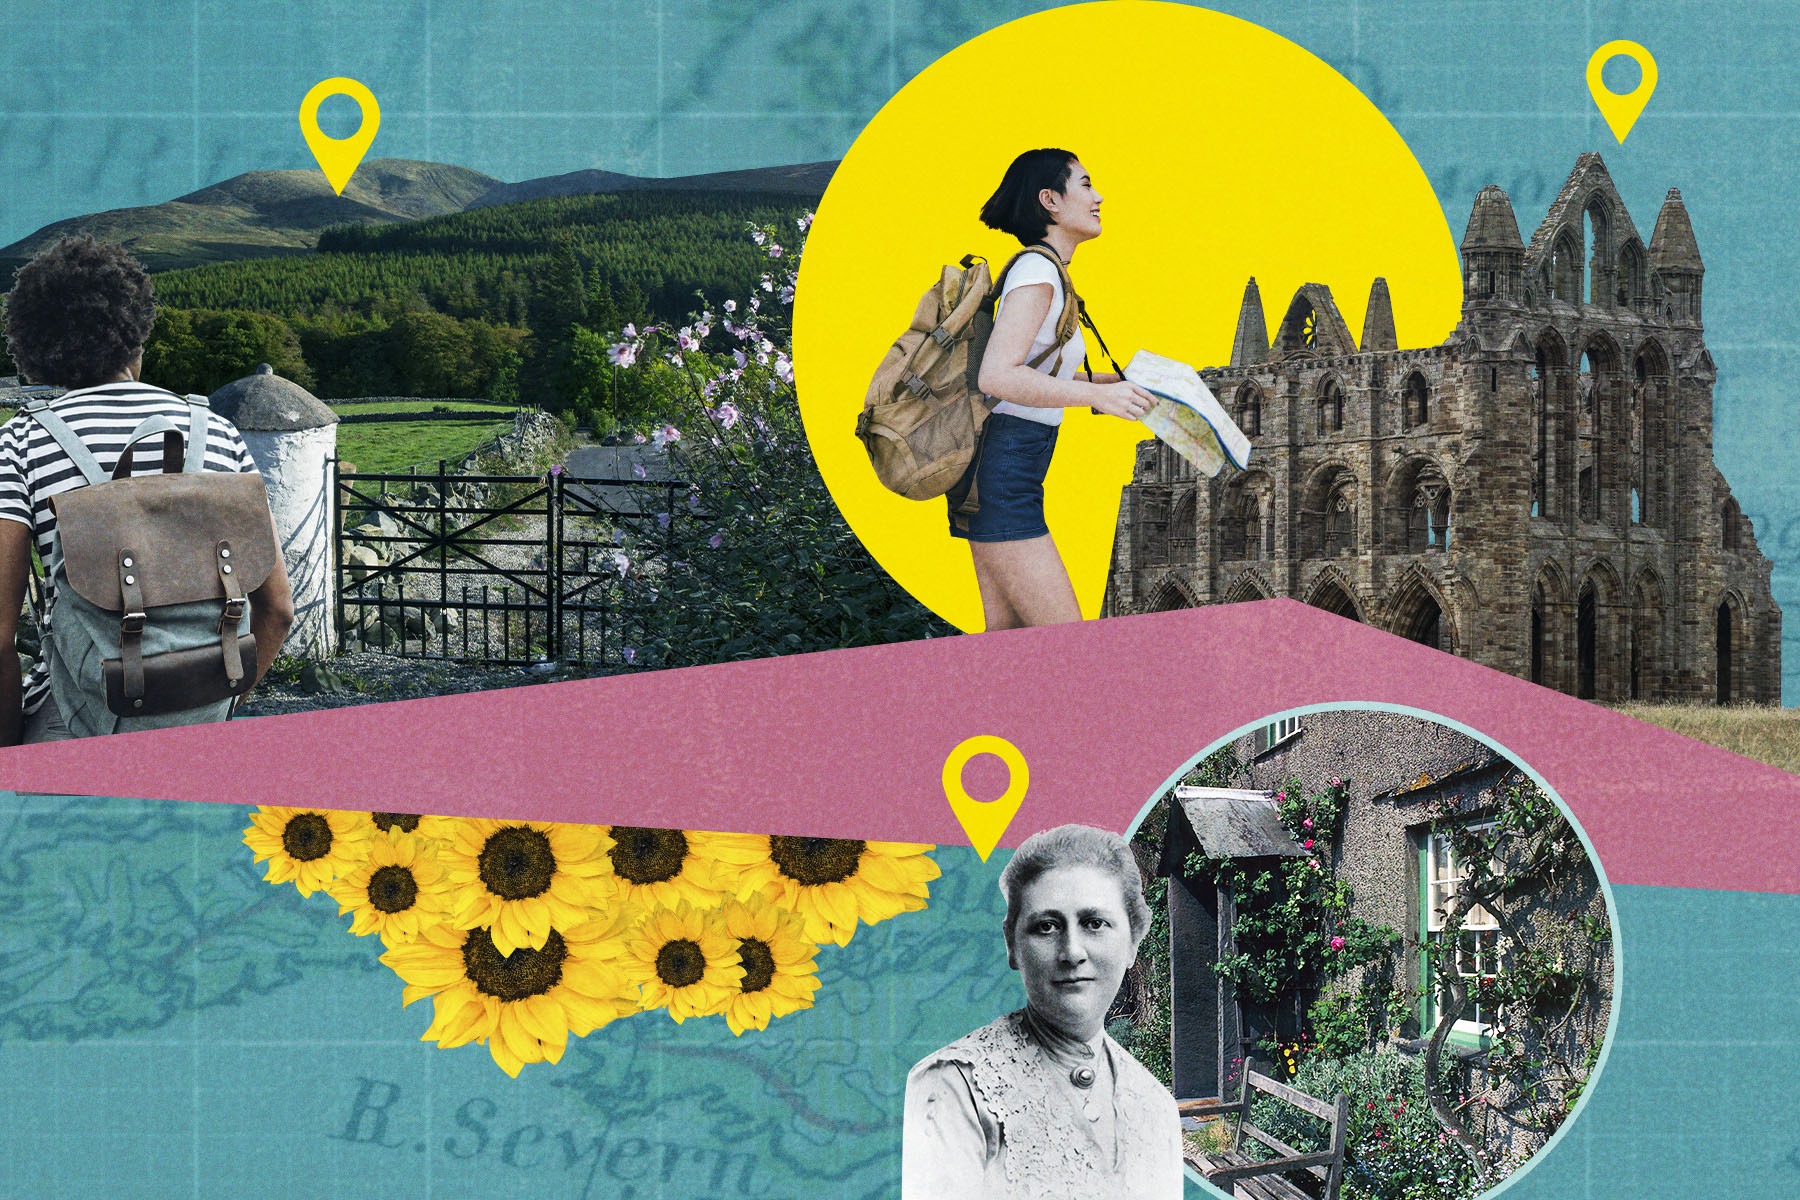 A collage on a teal background of a woman walking with a backpack and a map, Beatrix Potter's house, sunflowers and Newstead Abbey